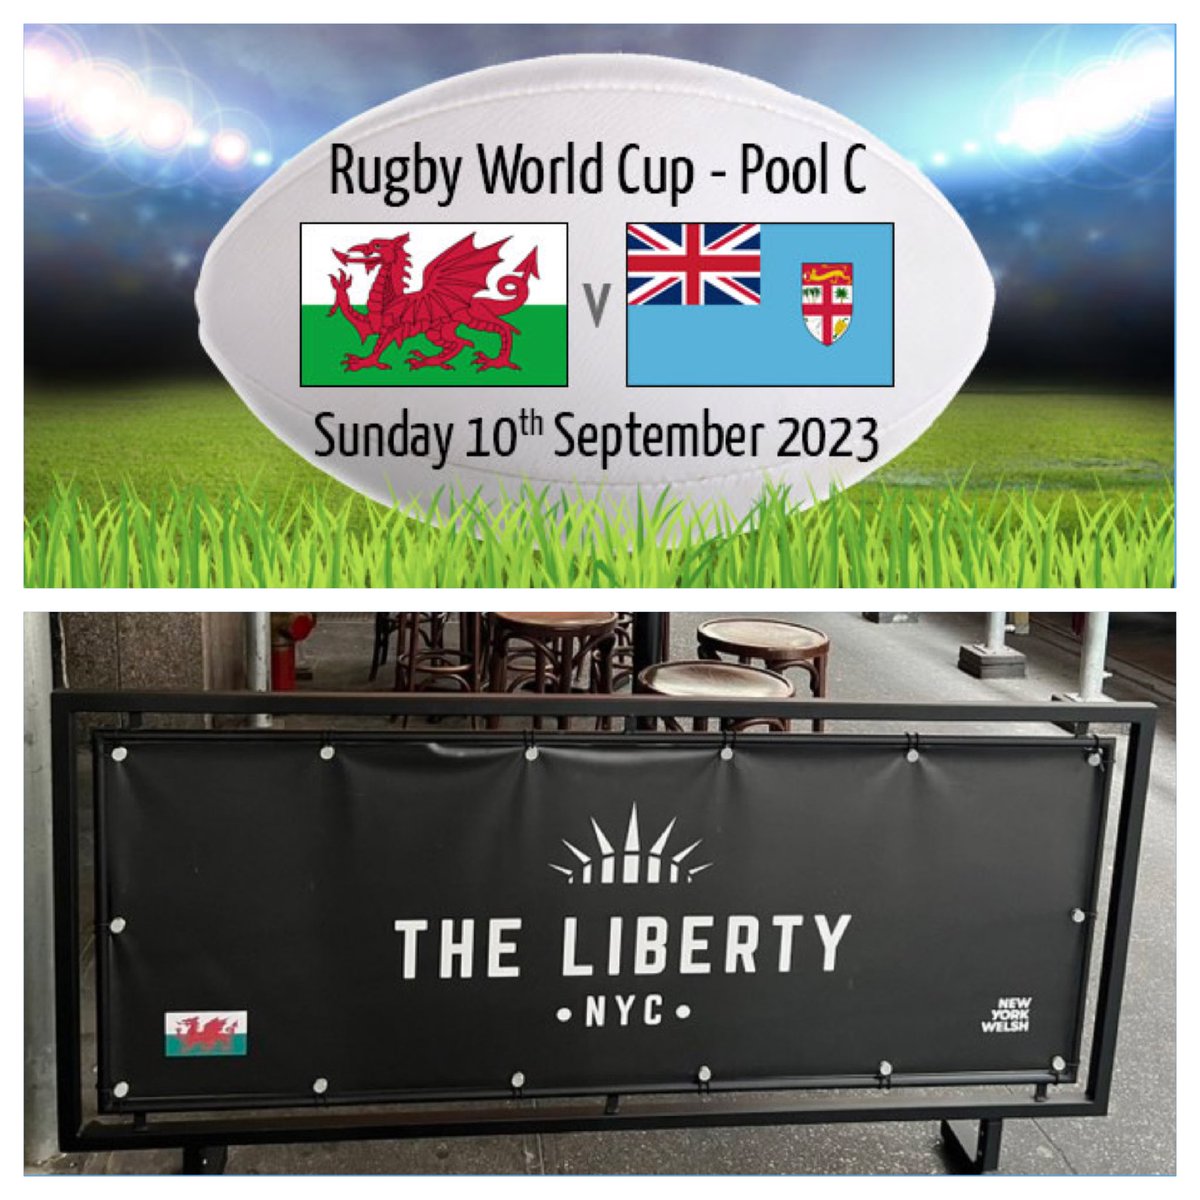 It's almost kickoff time! Wales' first pool match at the Rugby World Cup will be against Fiji at the Stade de Bordeaux this Sunday 10th September. Watch the game live at @TheLibertyNYC at 3pm EST with other Welsh supporters and don’t forget to wear your brightest red! 🗽🏴󠁧󠁢󠁷󠁬󠁳󠁿